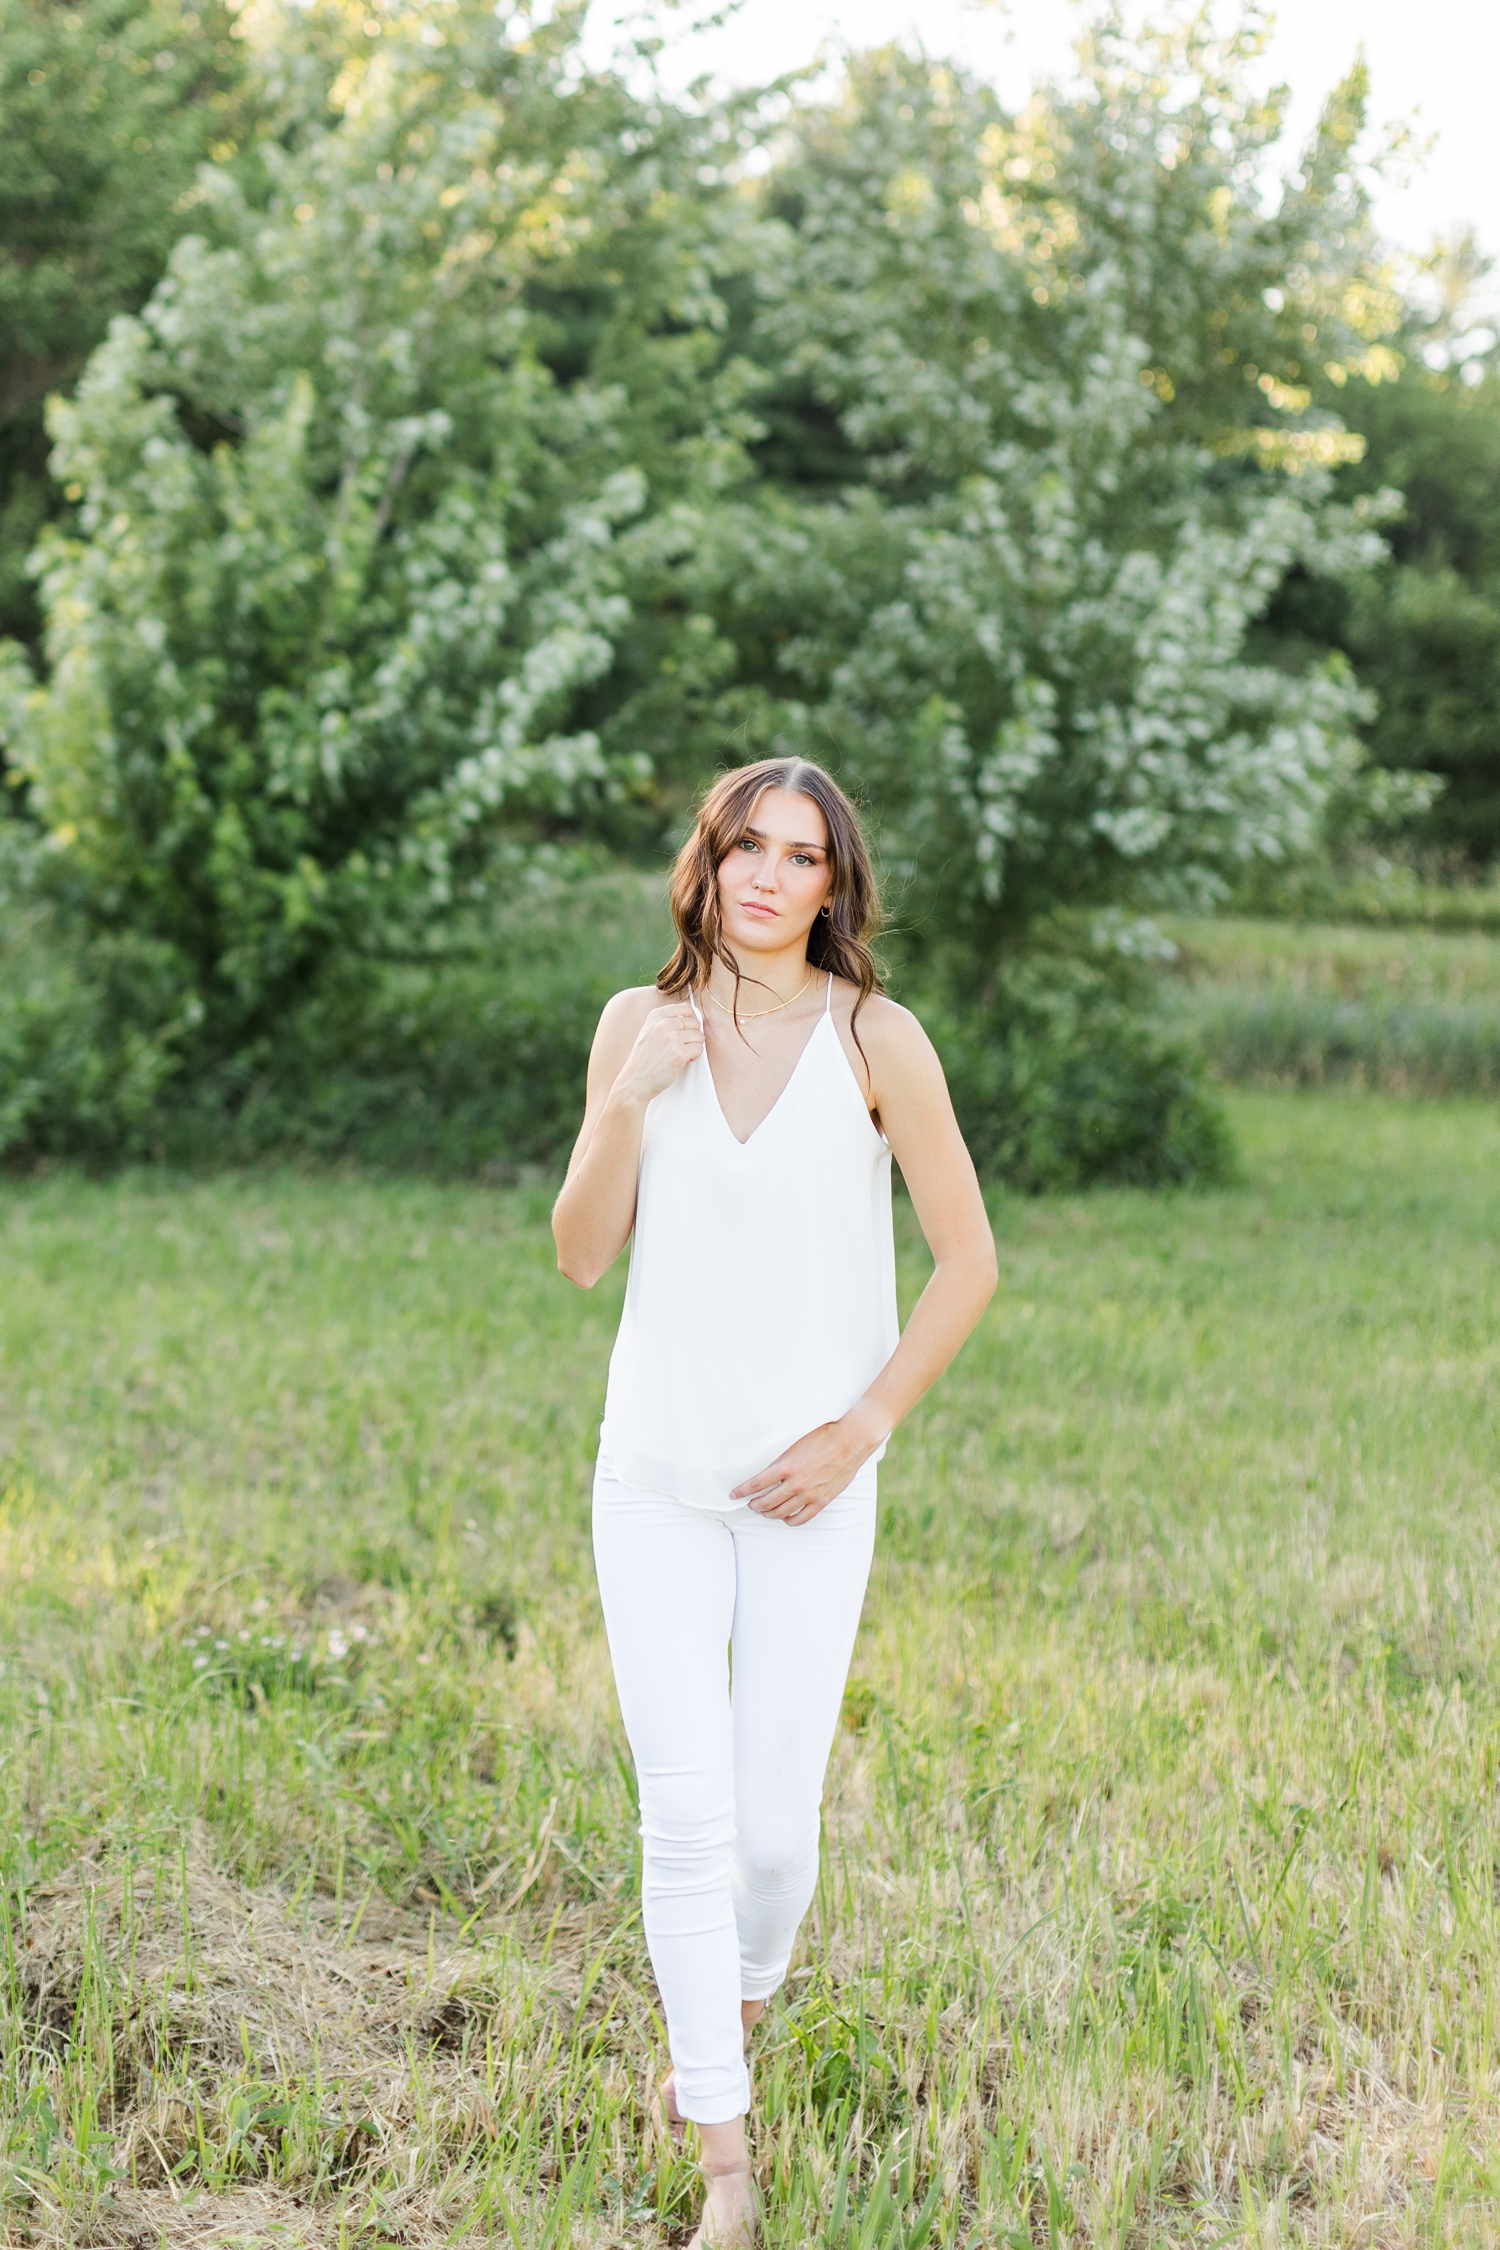 Mallory walks in a grassy field wearing white jeans and a white tank top | CB Studio